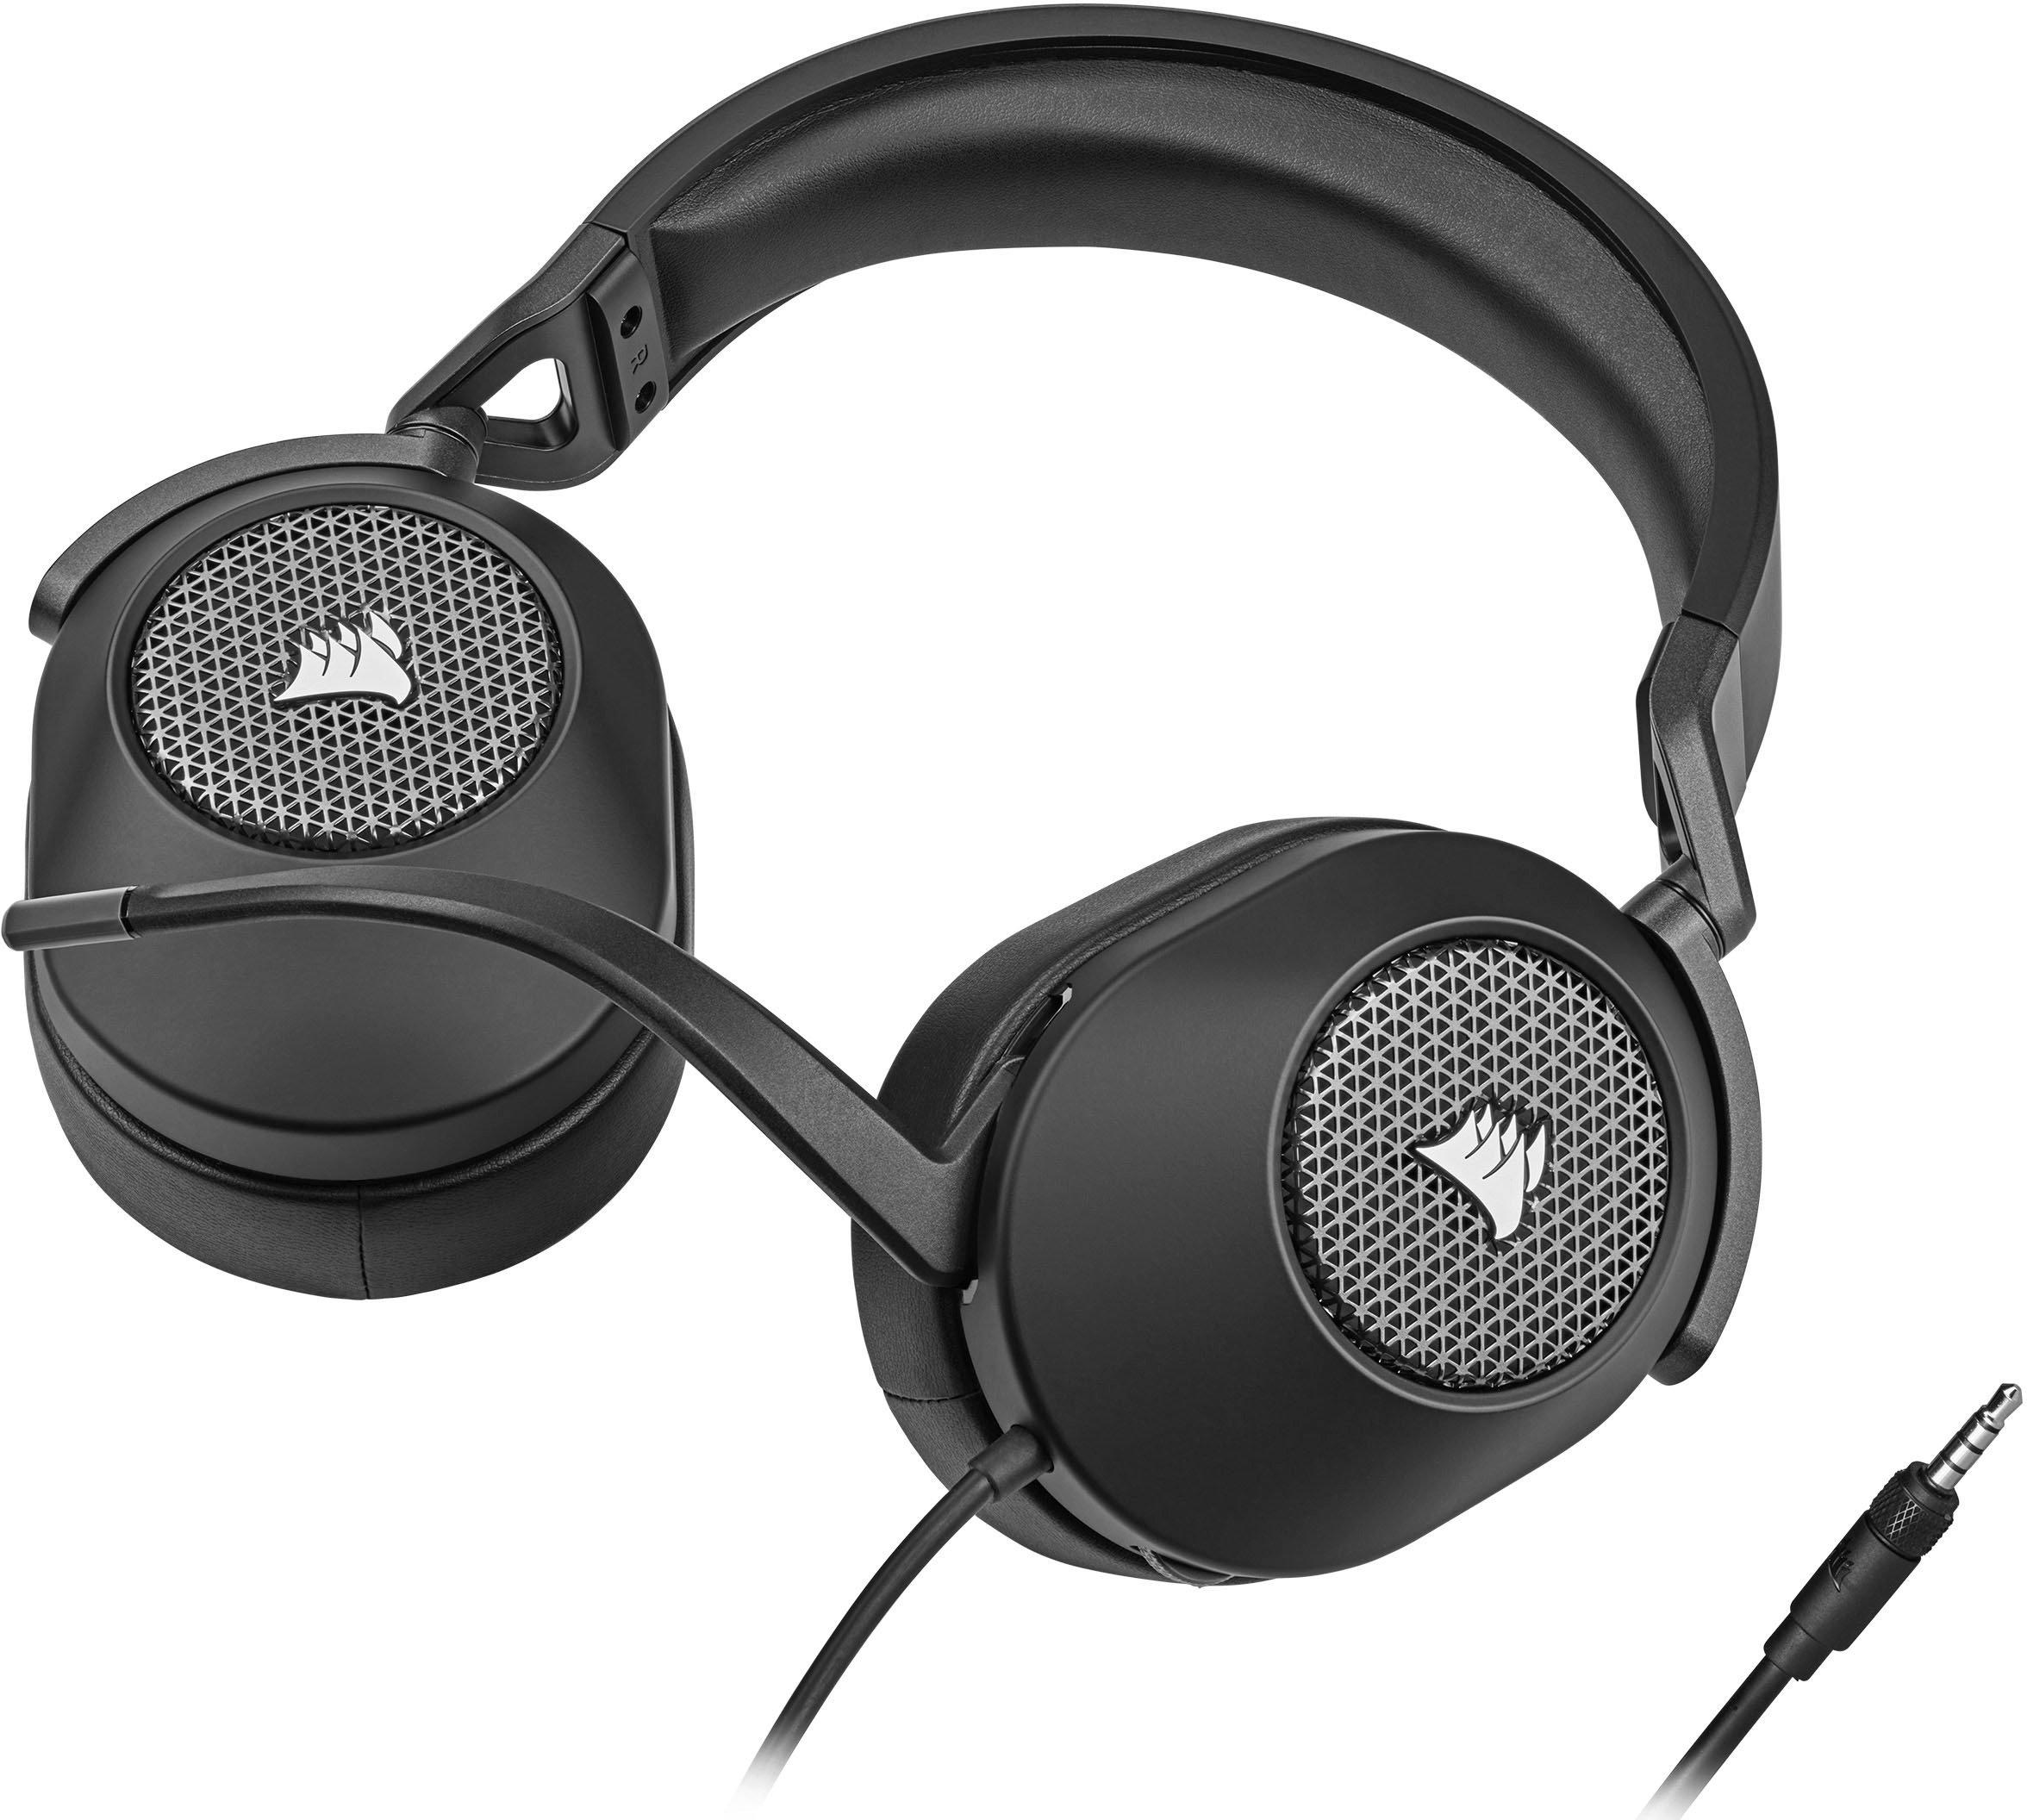 Headset Surround 7.1 4 | GameStop for Carbon PlayStation and PC, 5, Wired CORSAIR PlayStation HS65 Gaming